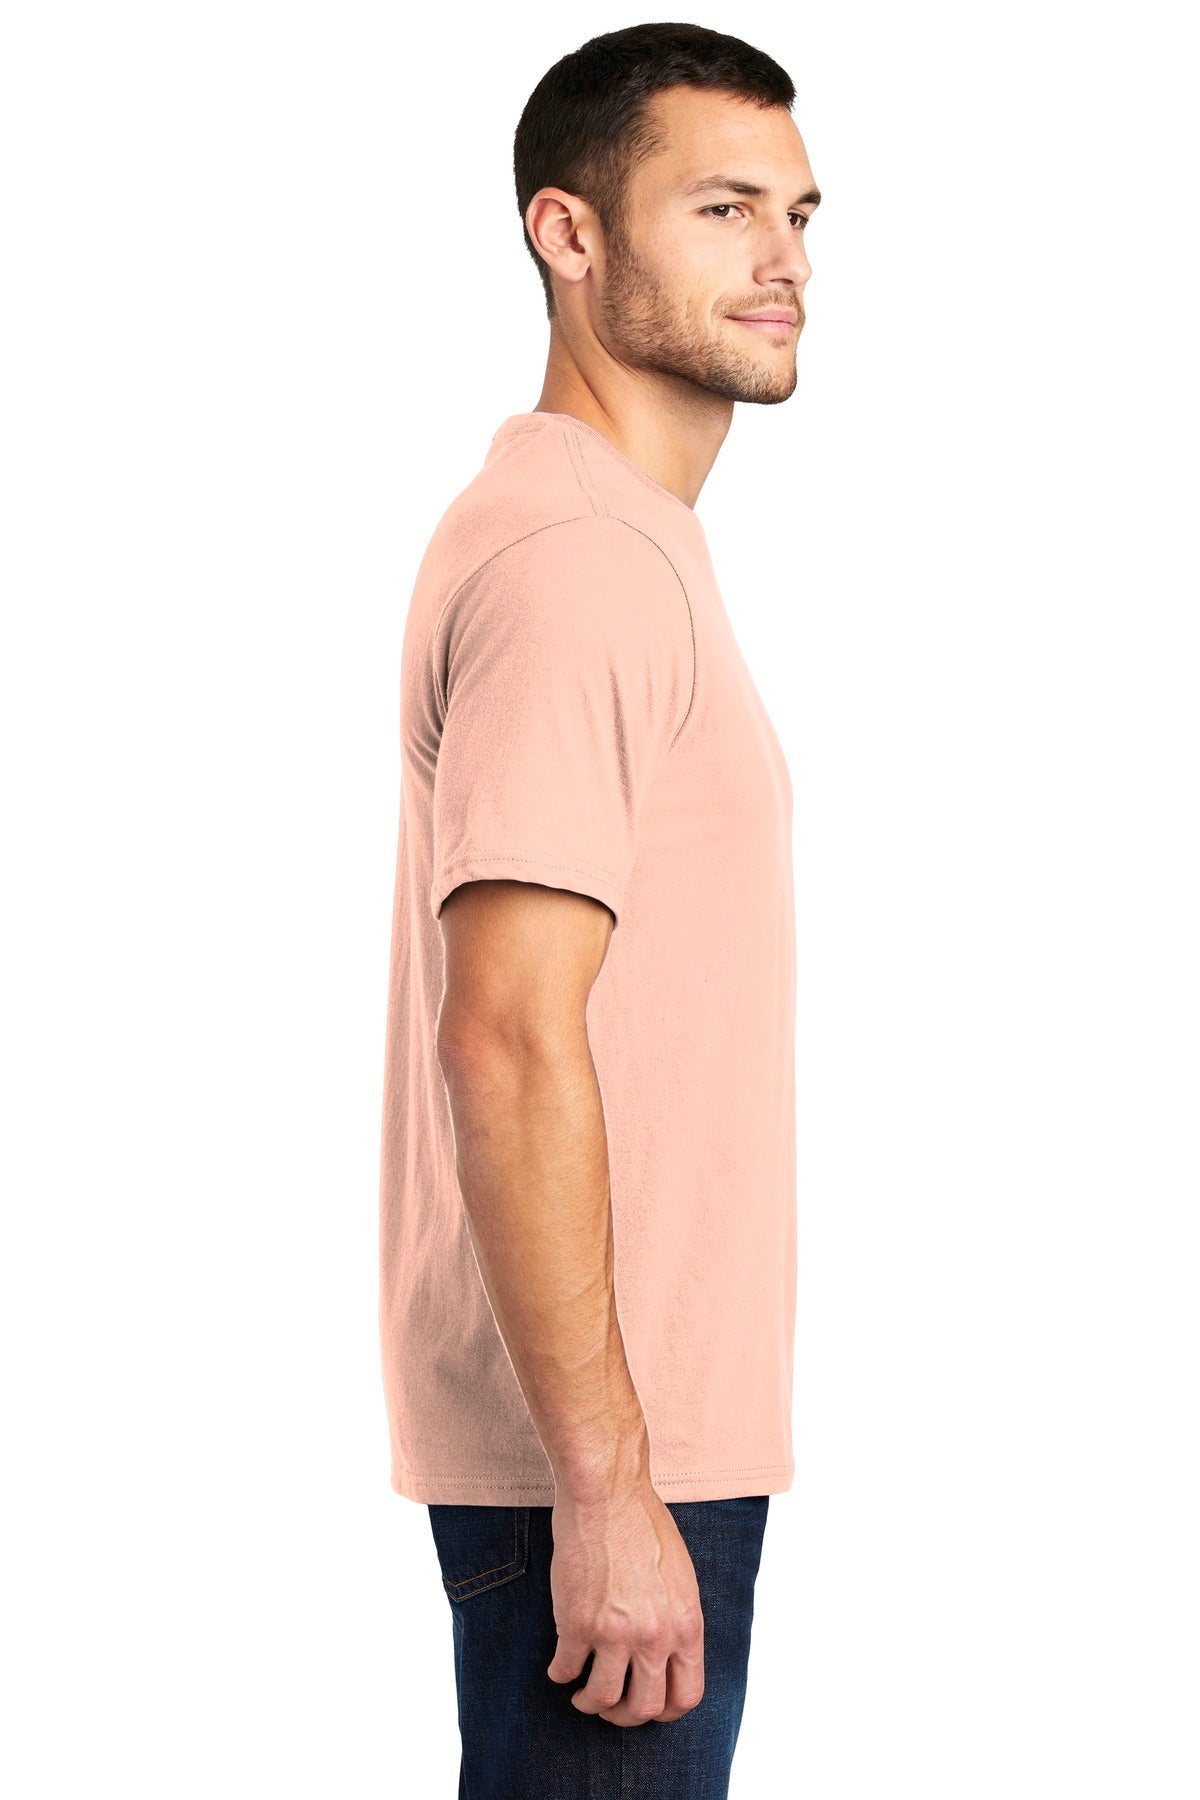 District® Very Important Tee®. DT6000 [Dusty Peach] - DFW Impression